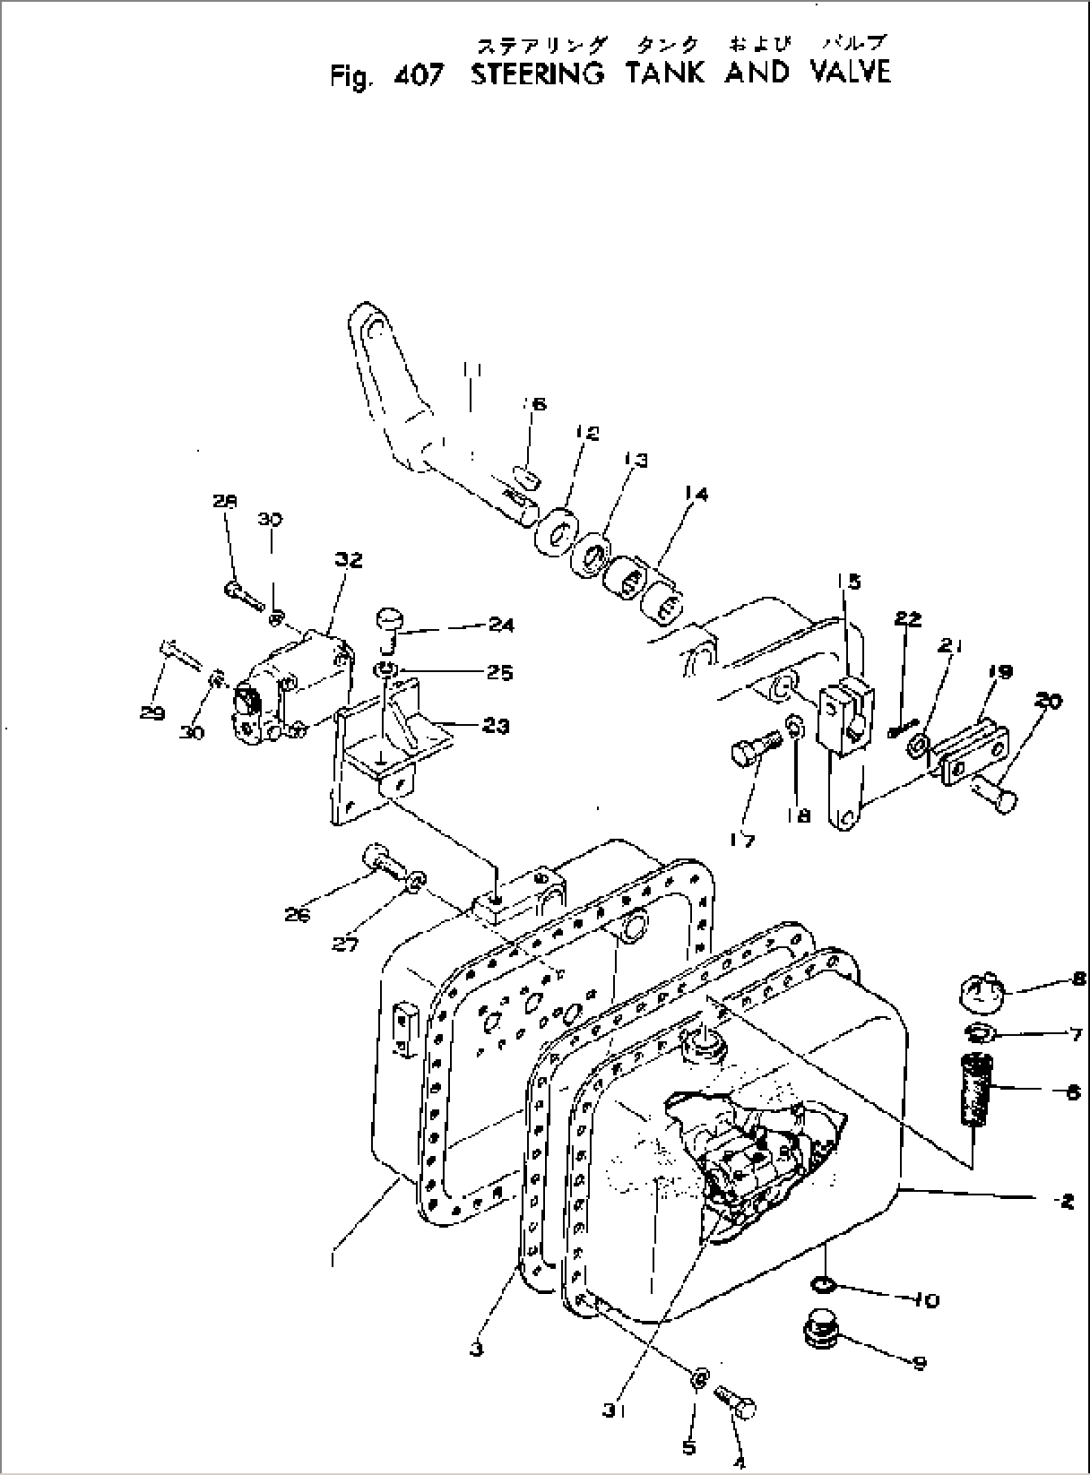 STEERING TANK AND VALVE